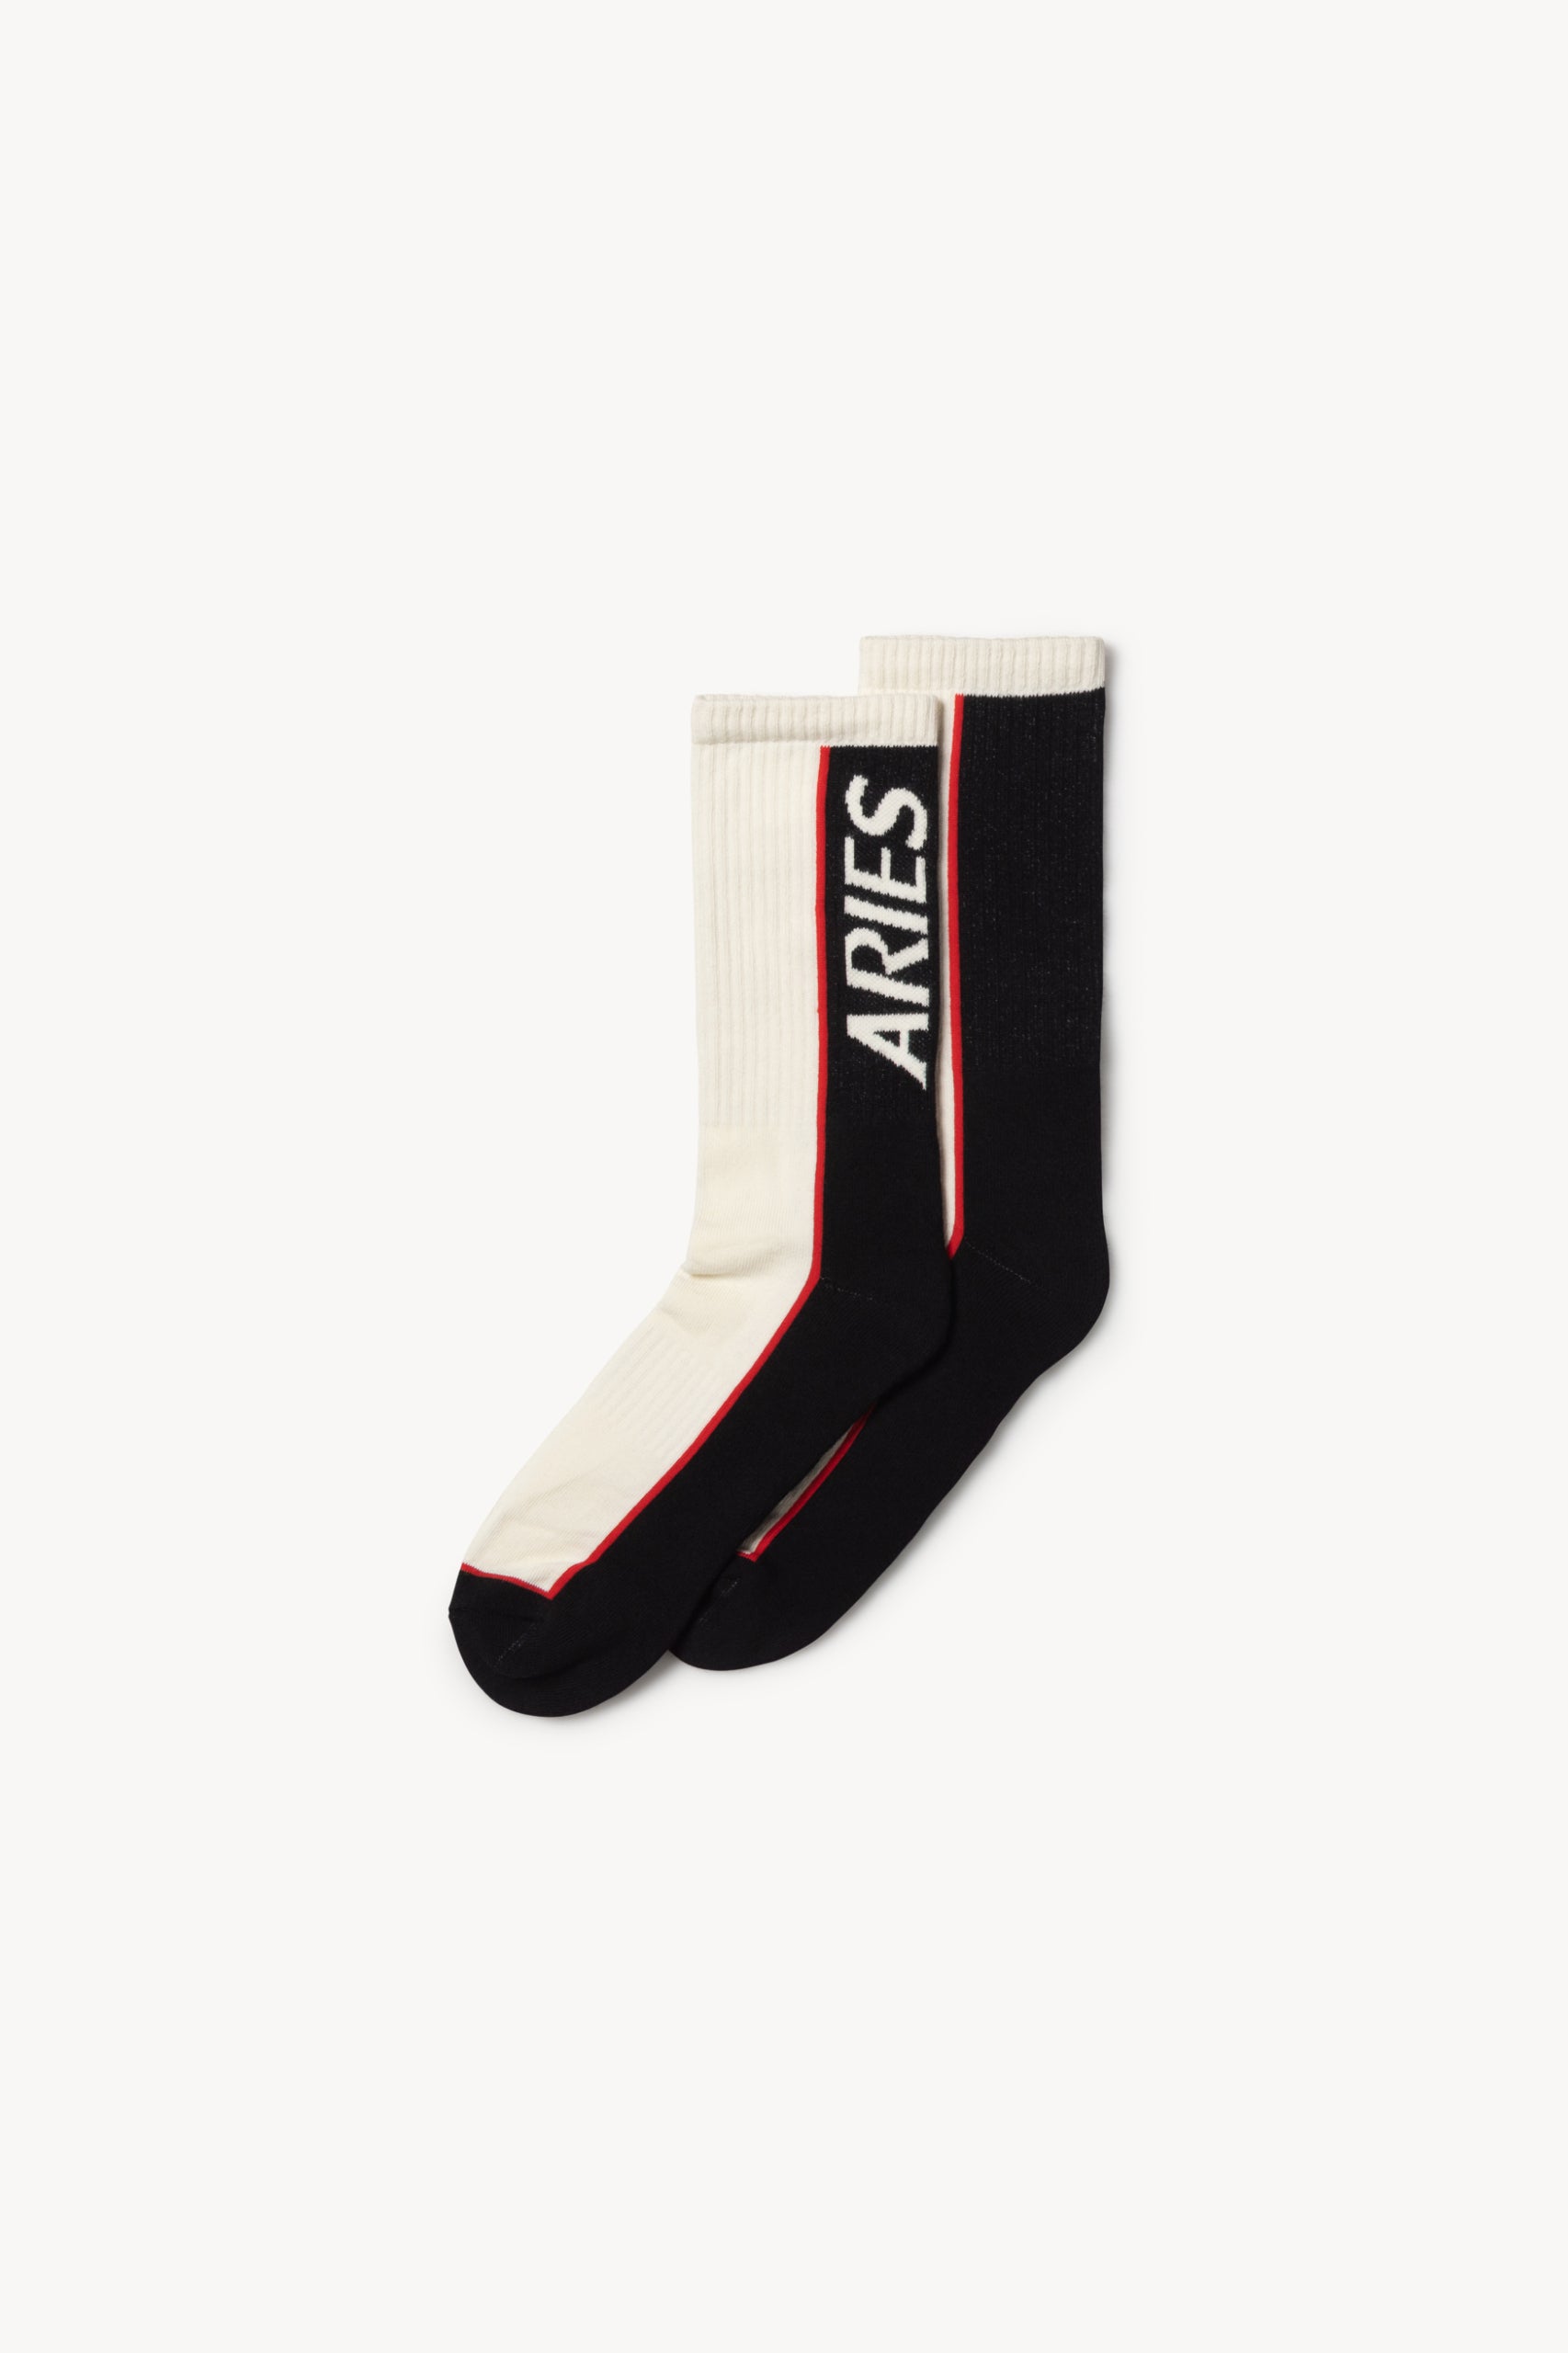 white socks with black stripe that reads aries